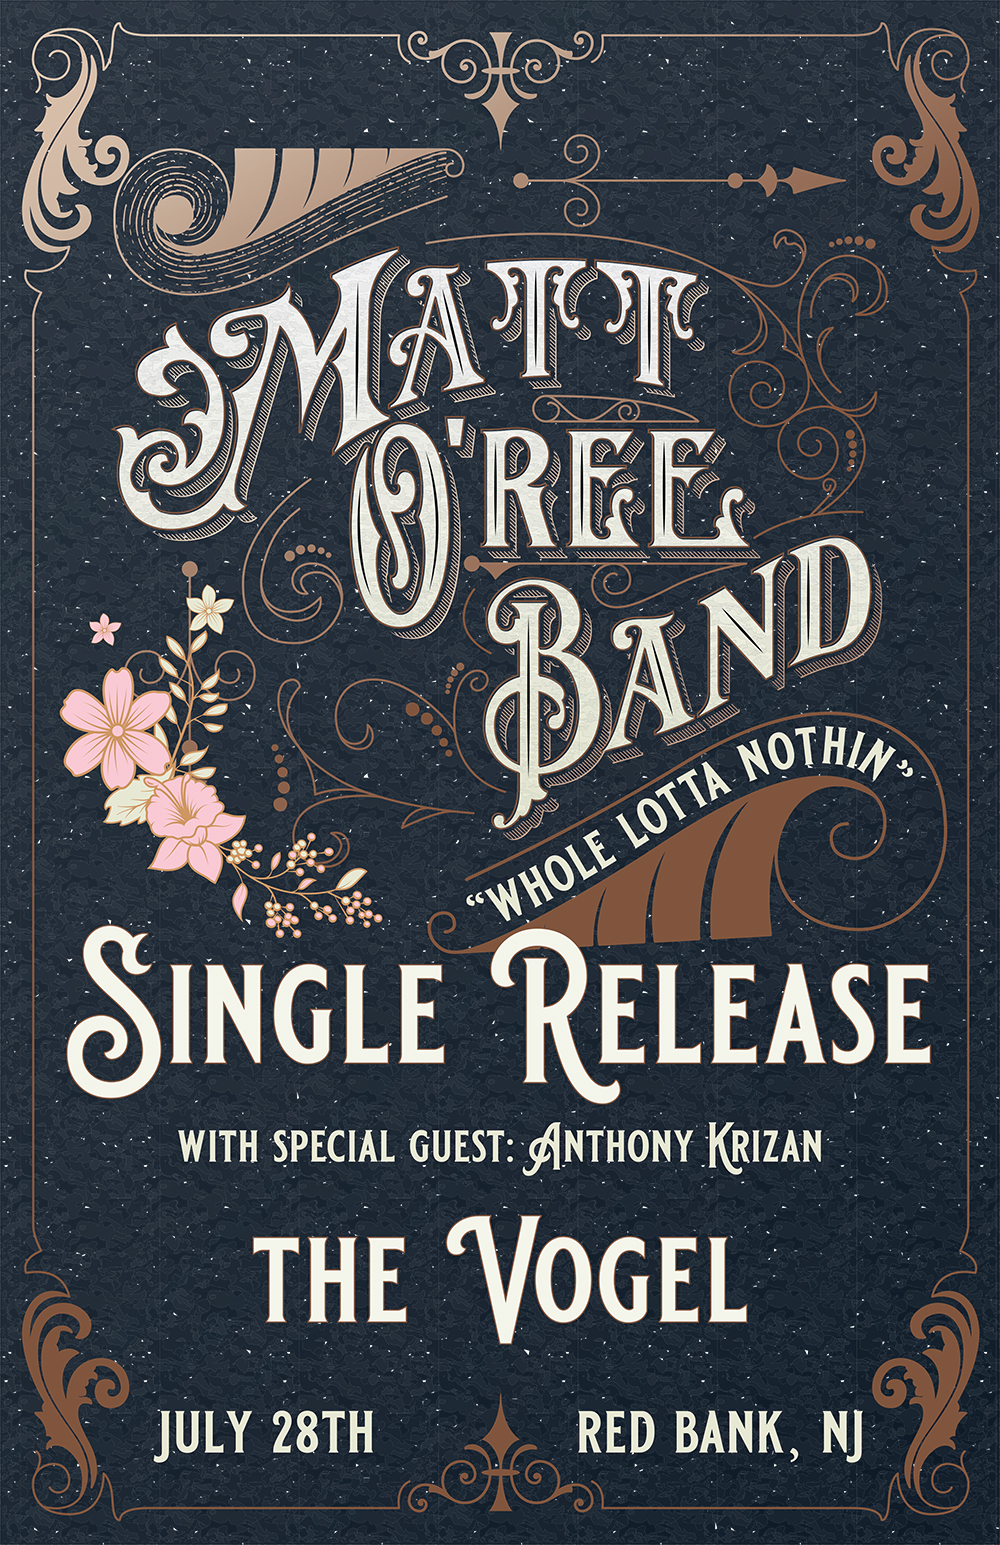 Single Release at The Vogel